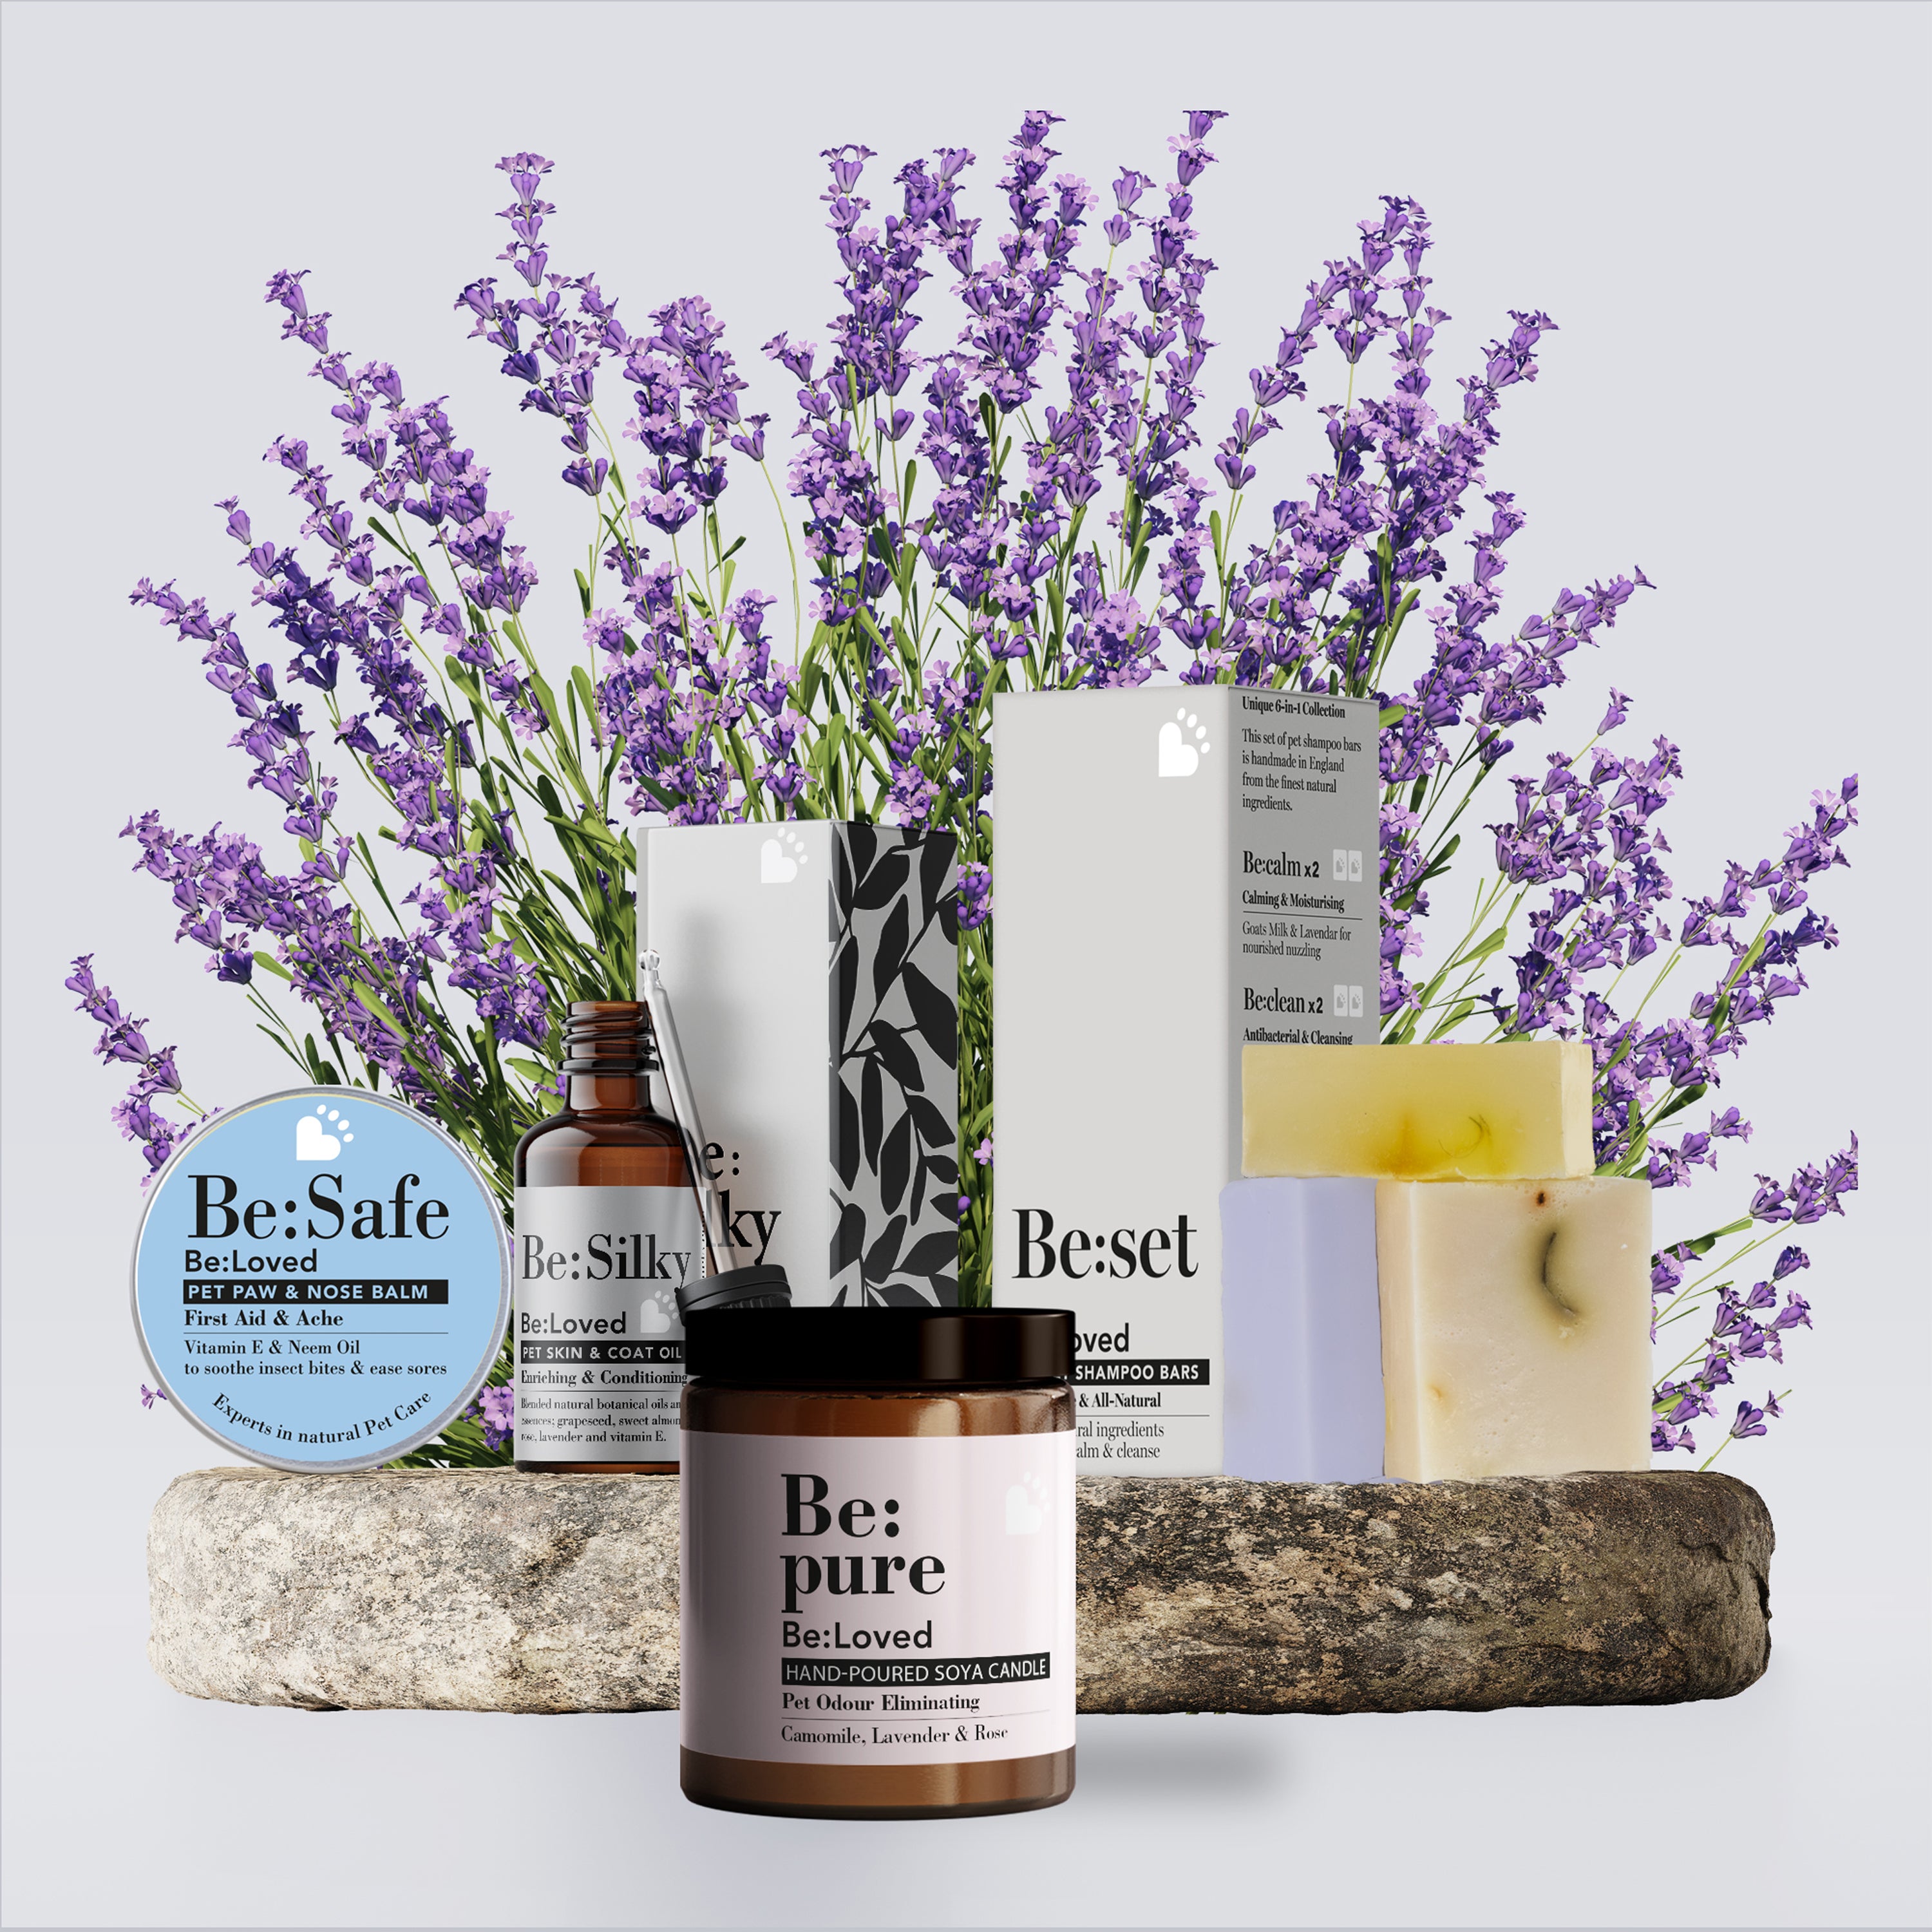 Be:Loved gift bundle with 4 images of the products included and a background of lavender.